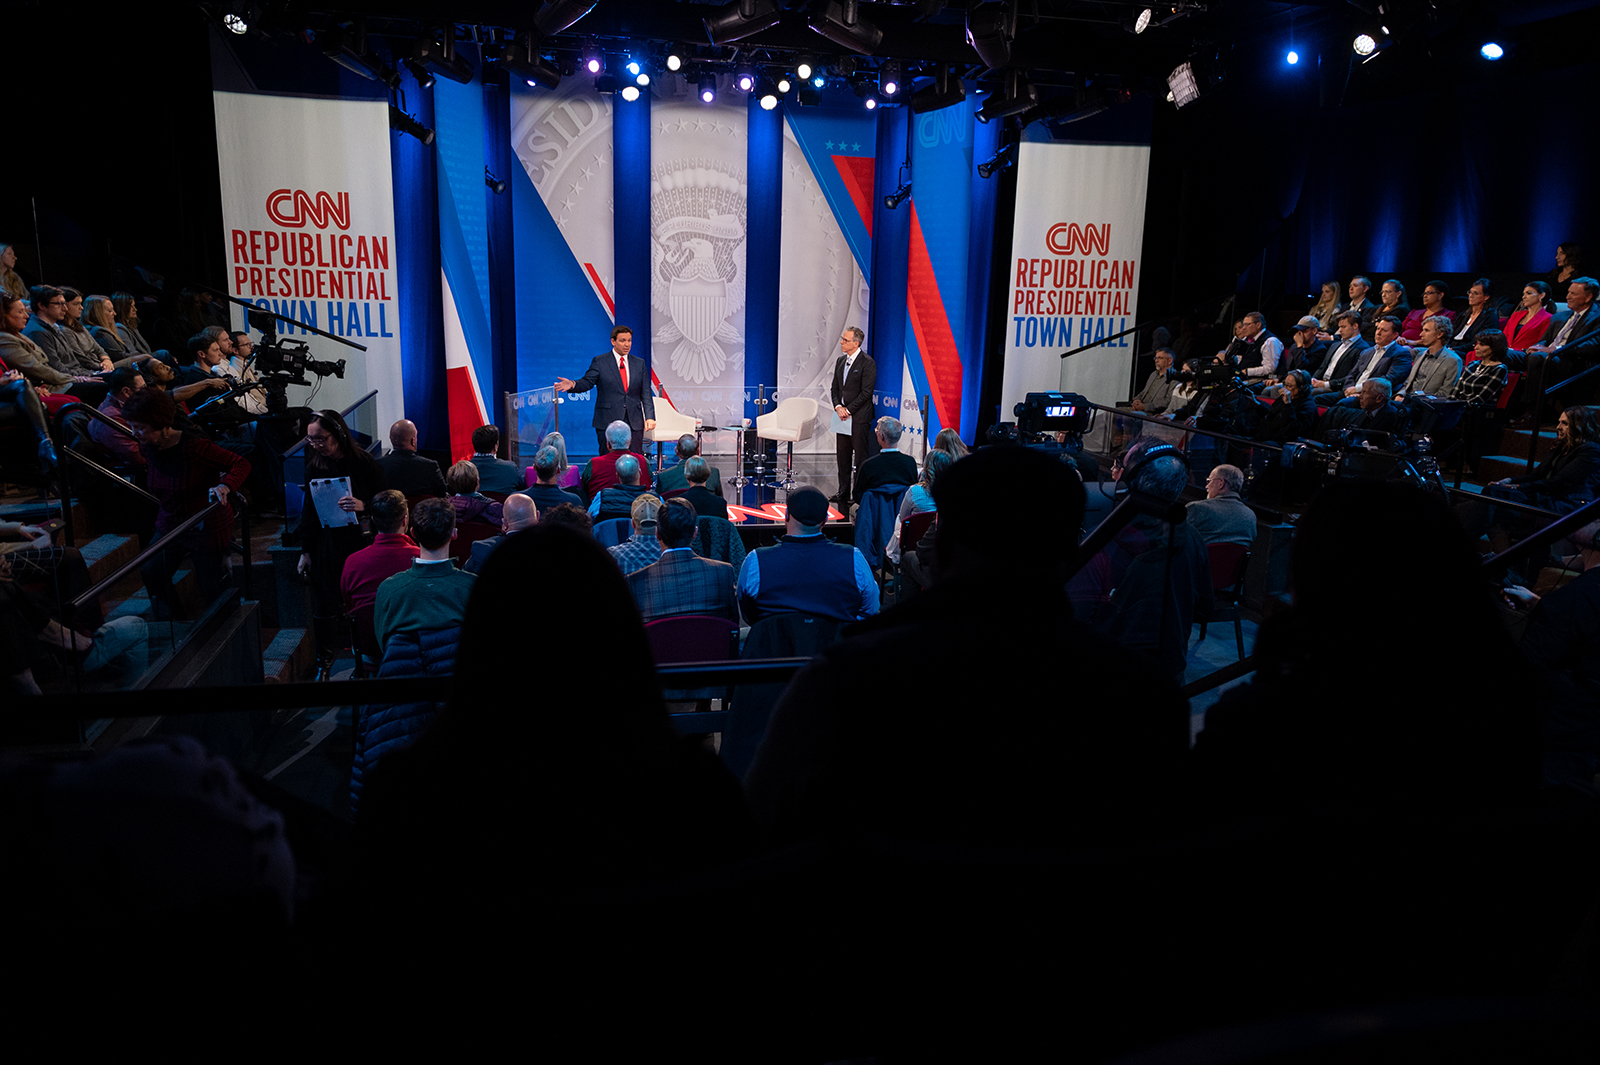 DeSantis participates in a CNN Republican Town Hall moderated by CNN’s Jake Tapper at Grand View University in Des Moines, Iowa, on Tuesday.